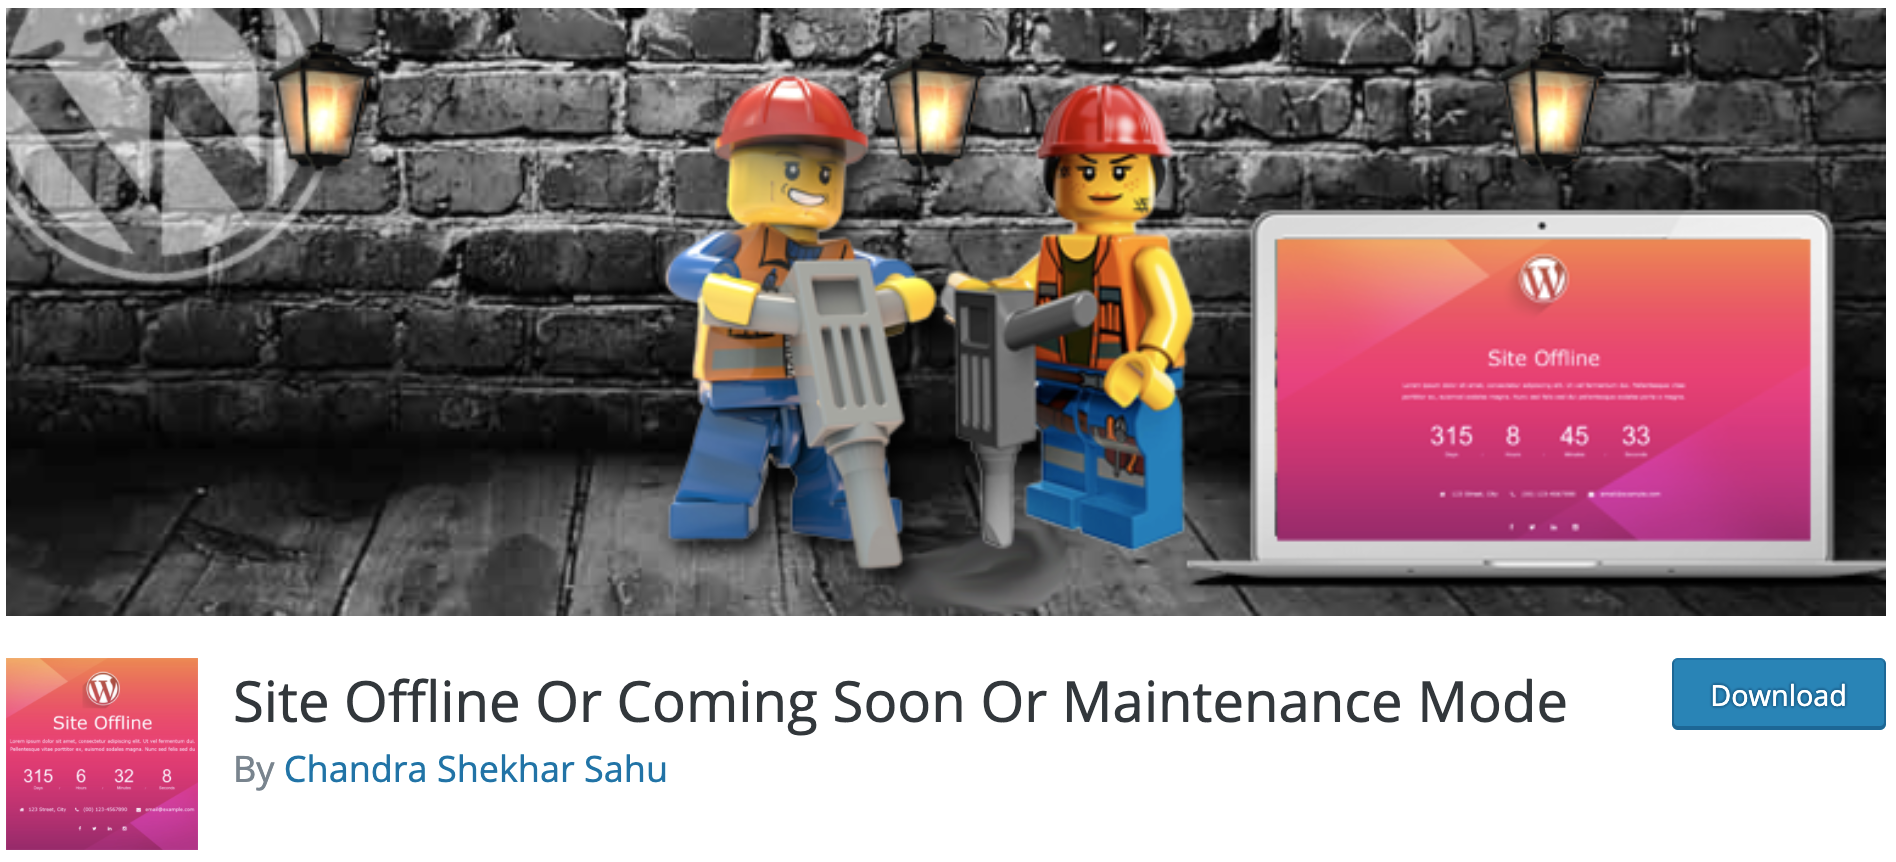 Maintenance Mode site. Coming or arrive